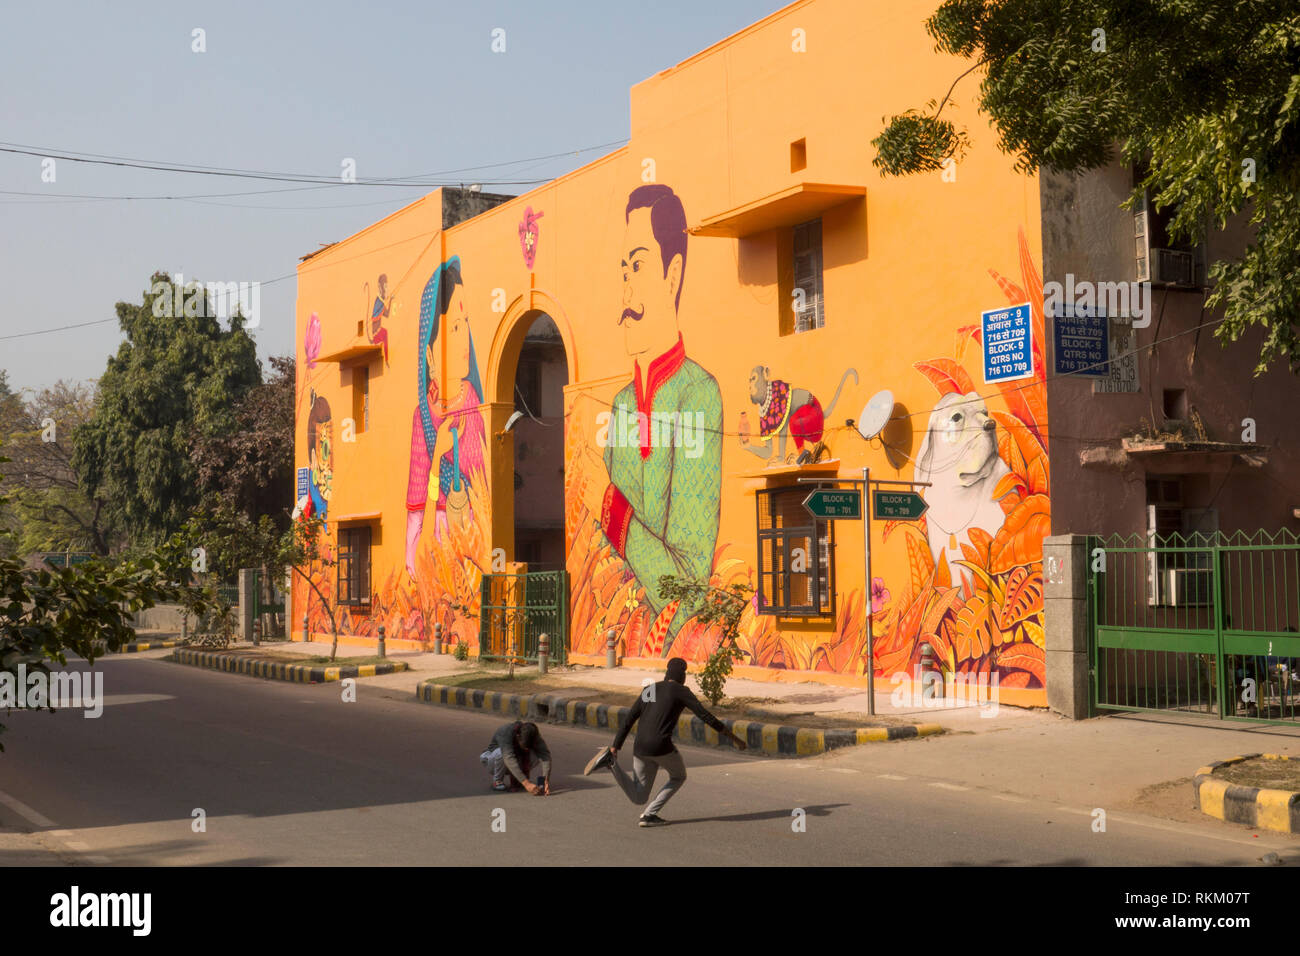 Young men creating photos in front of a wall mural painted by Mexican artist Saner in Lodhi colony, New Delhi, India Stock Photo